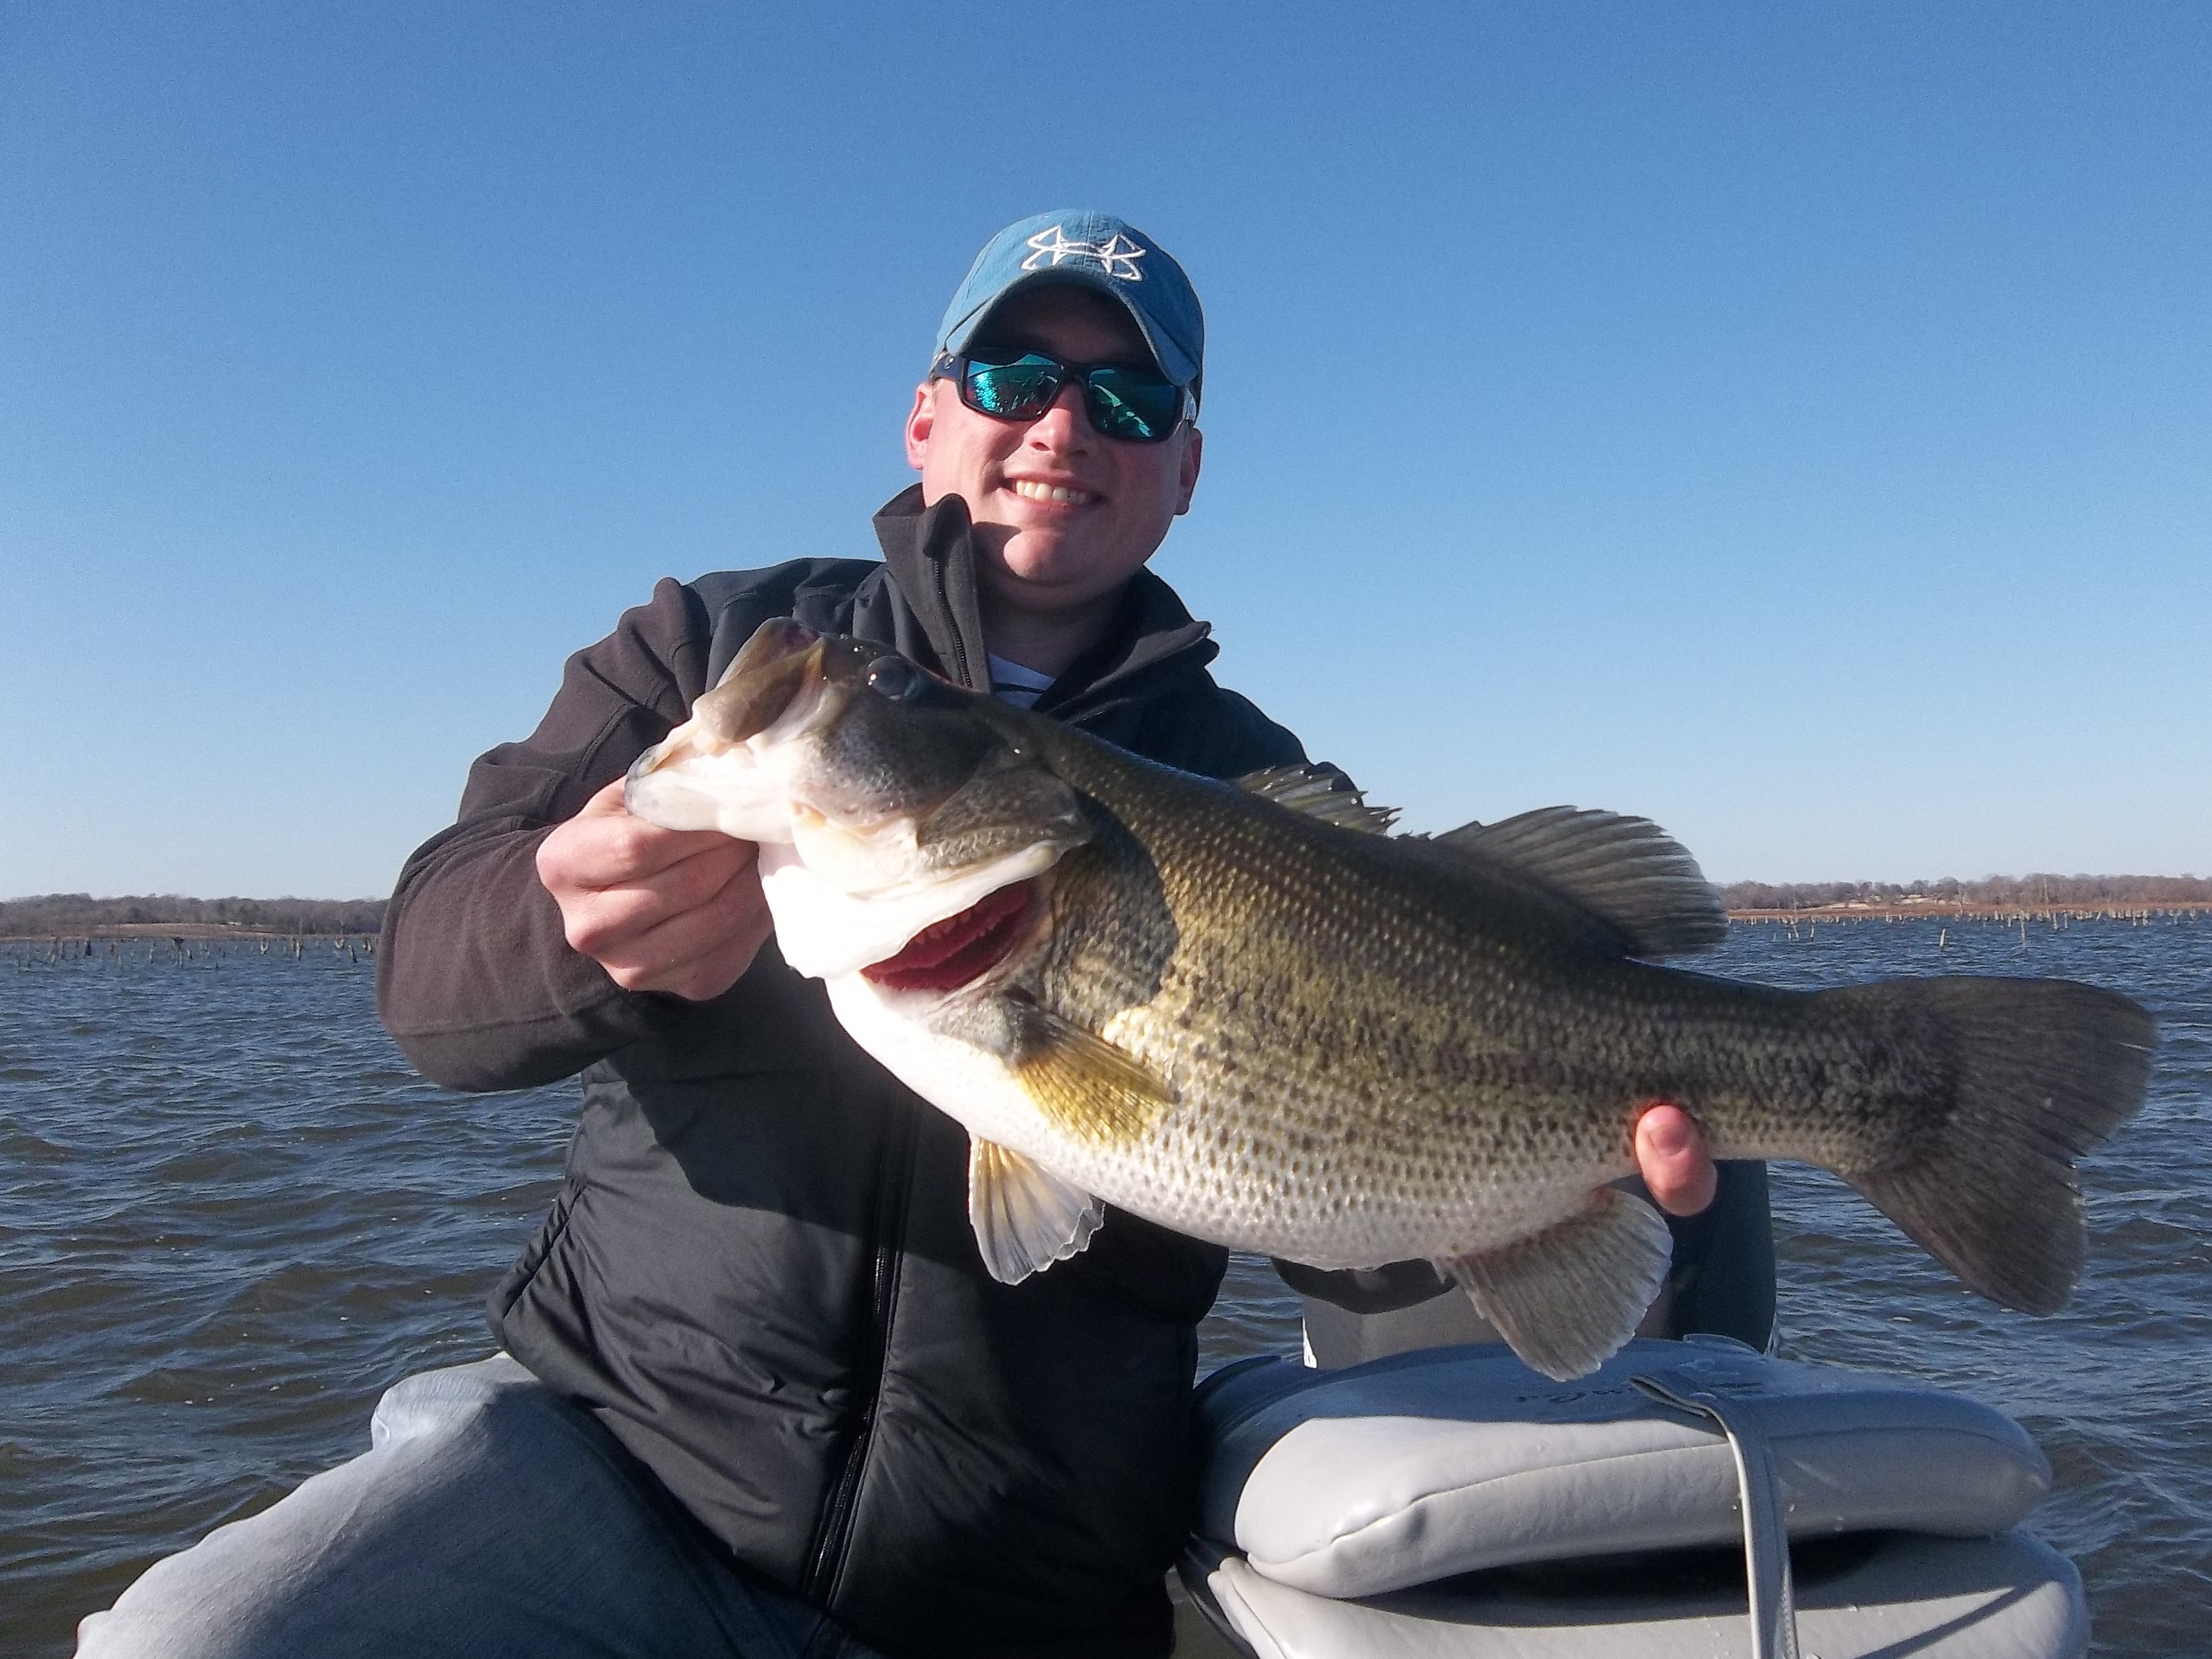 The fish we caught today were starting to show up in a typical prespawn pat...